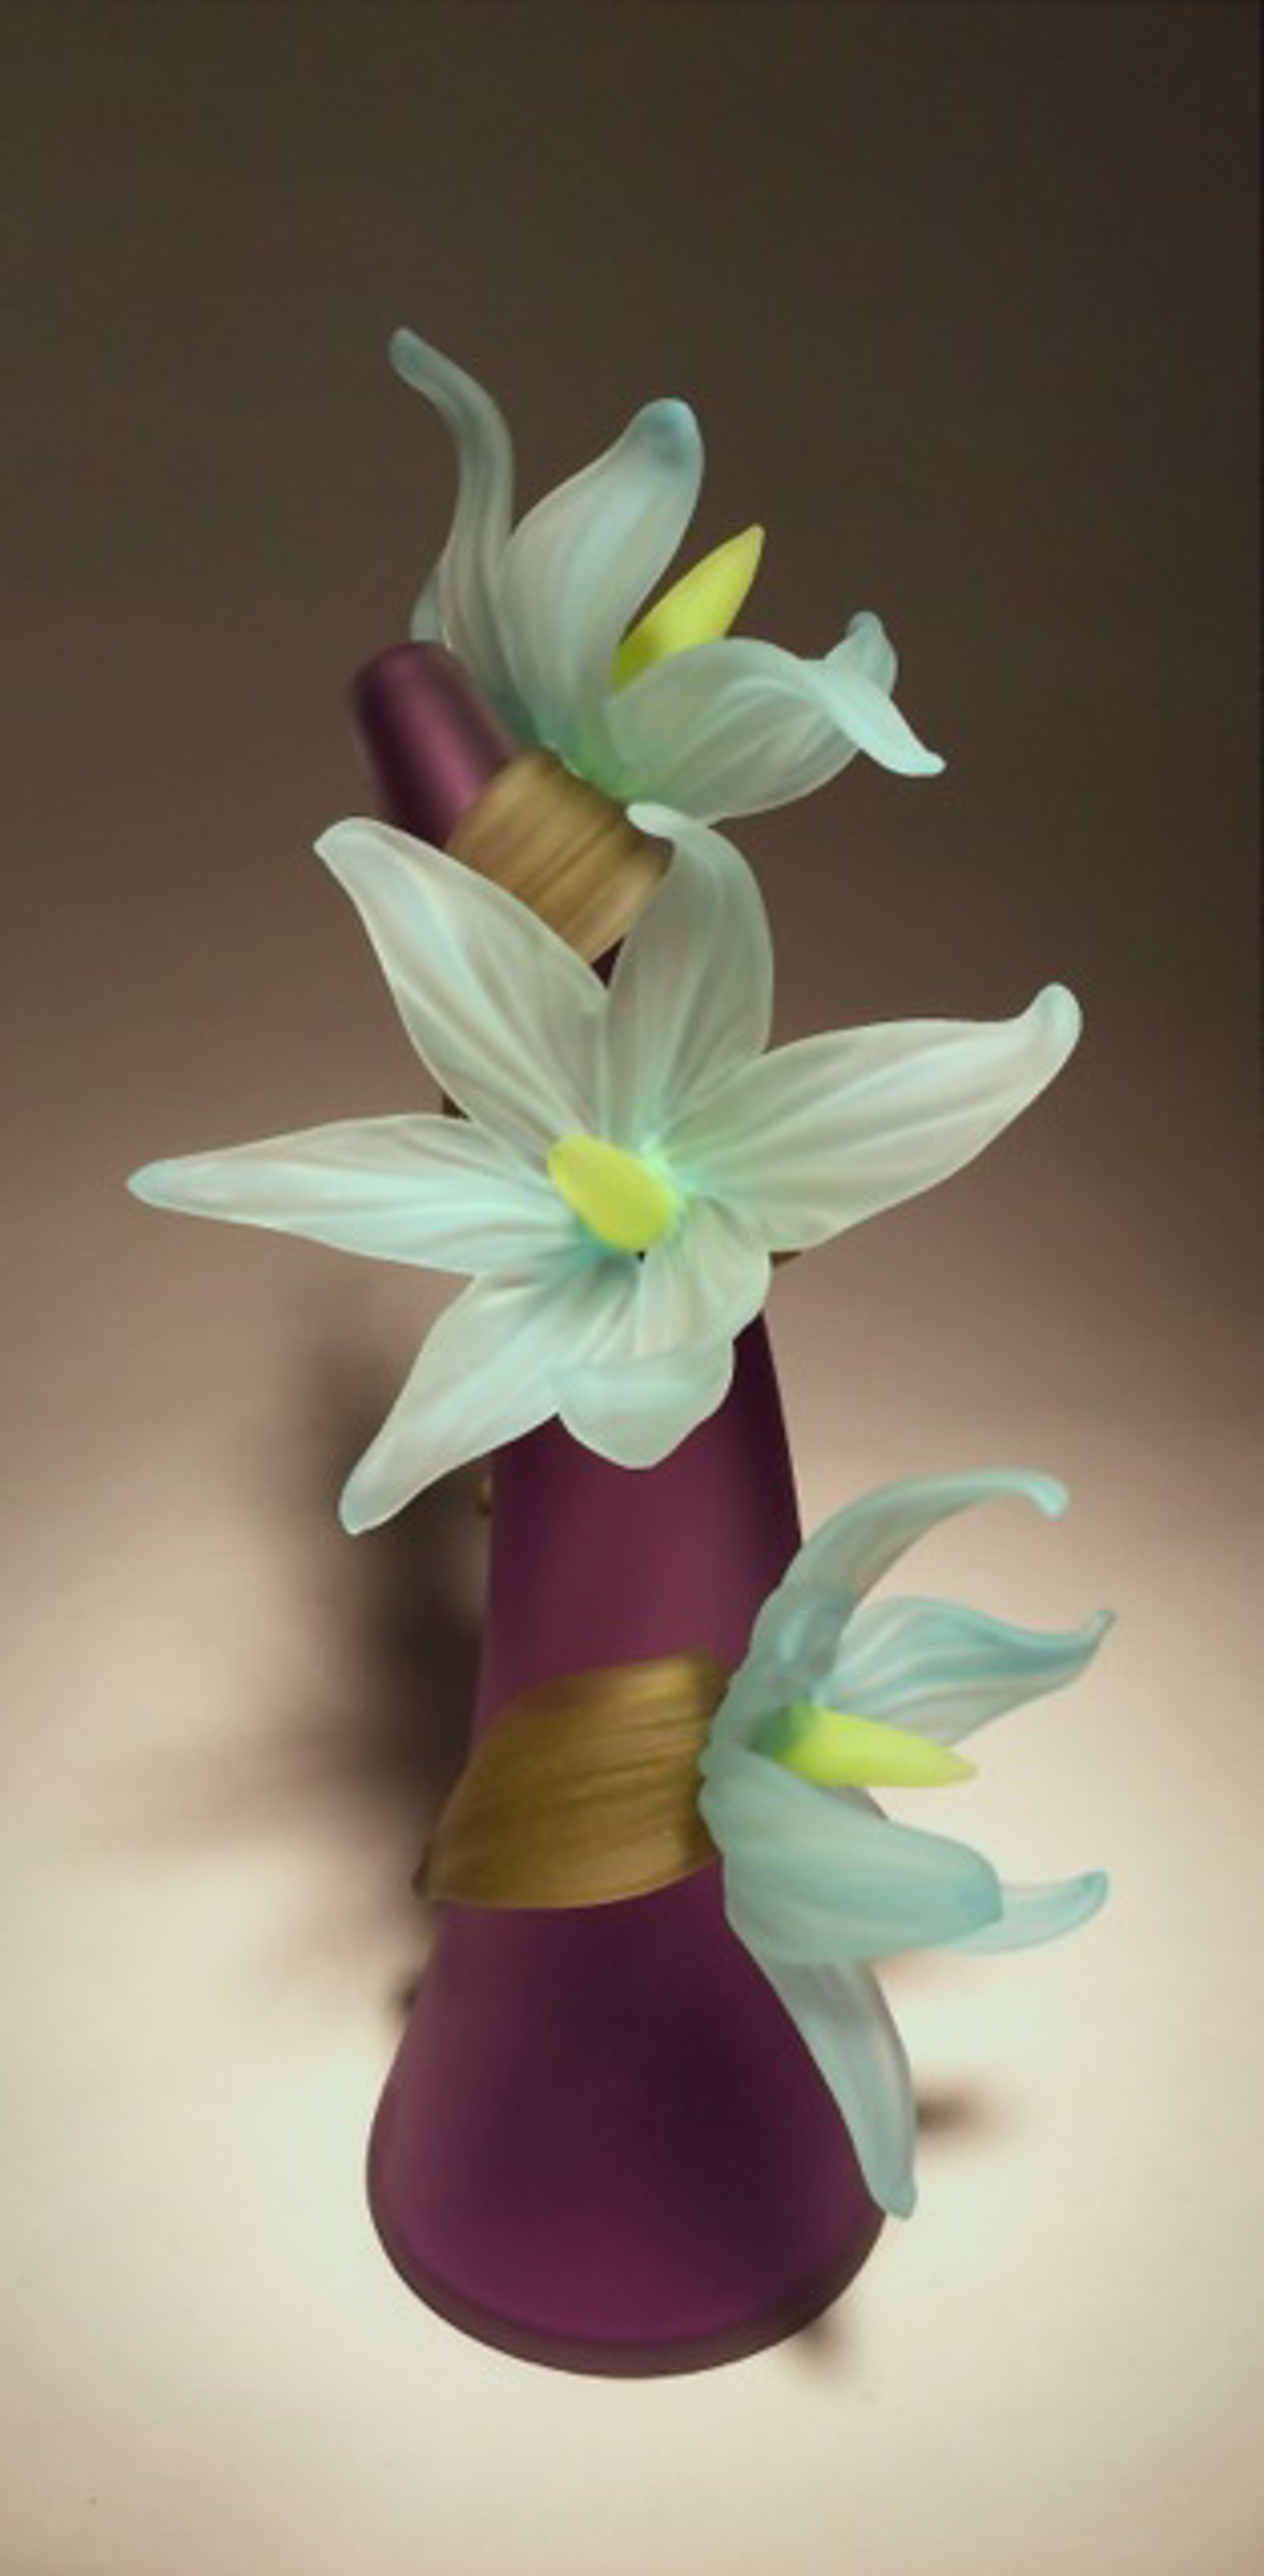 Sprig Vase - Purple with Soft Blue Flowers by Susan Rankin